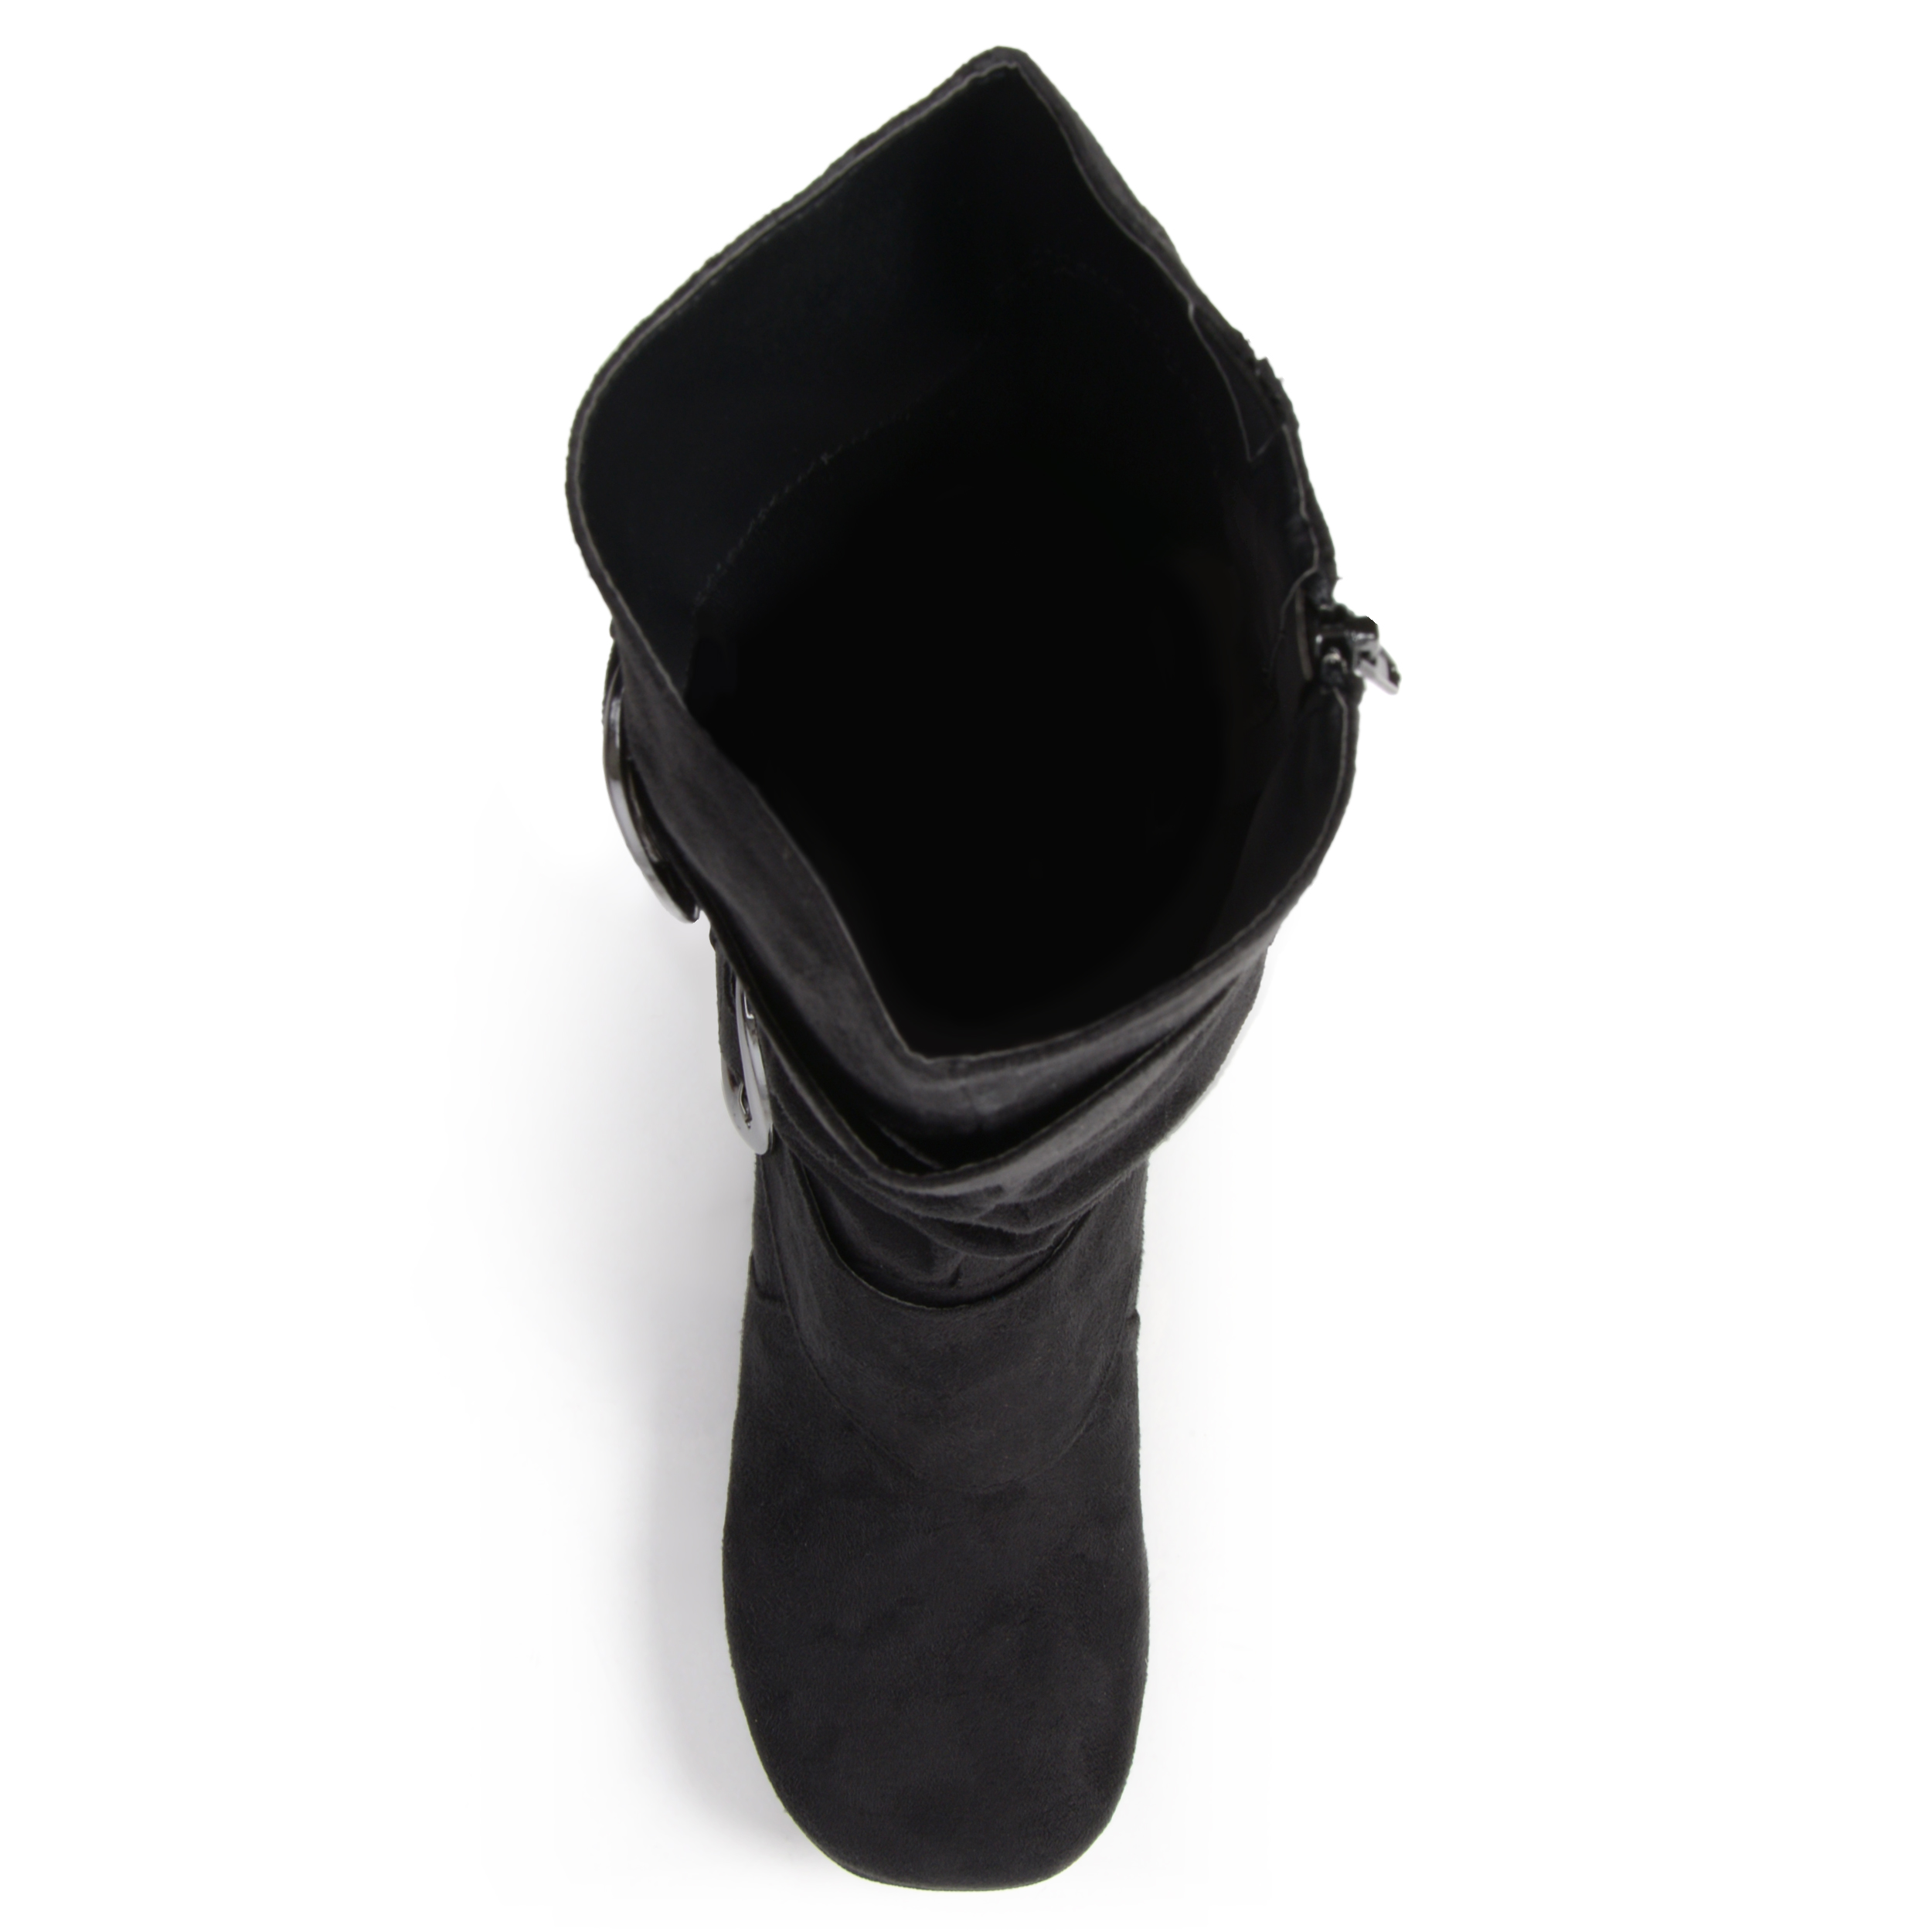 Women's August Slouchy Wide Calf Boots - image 5 of 8